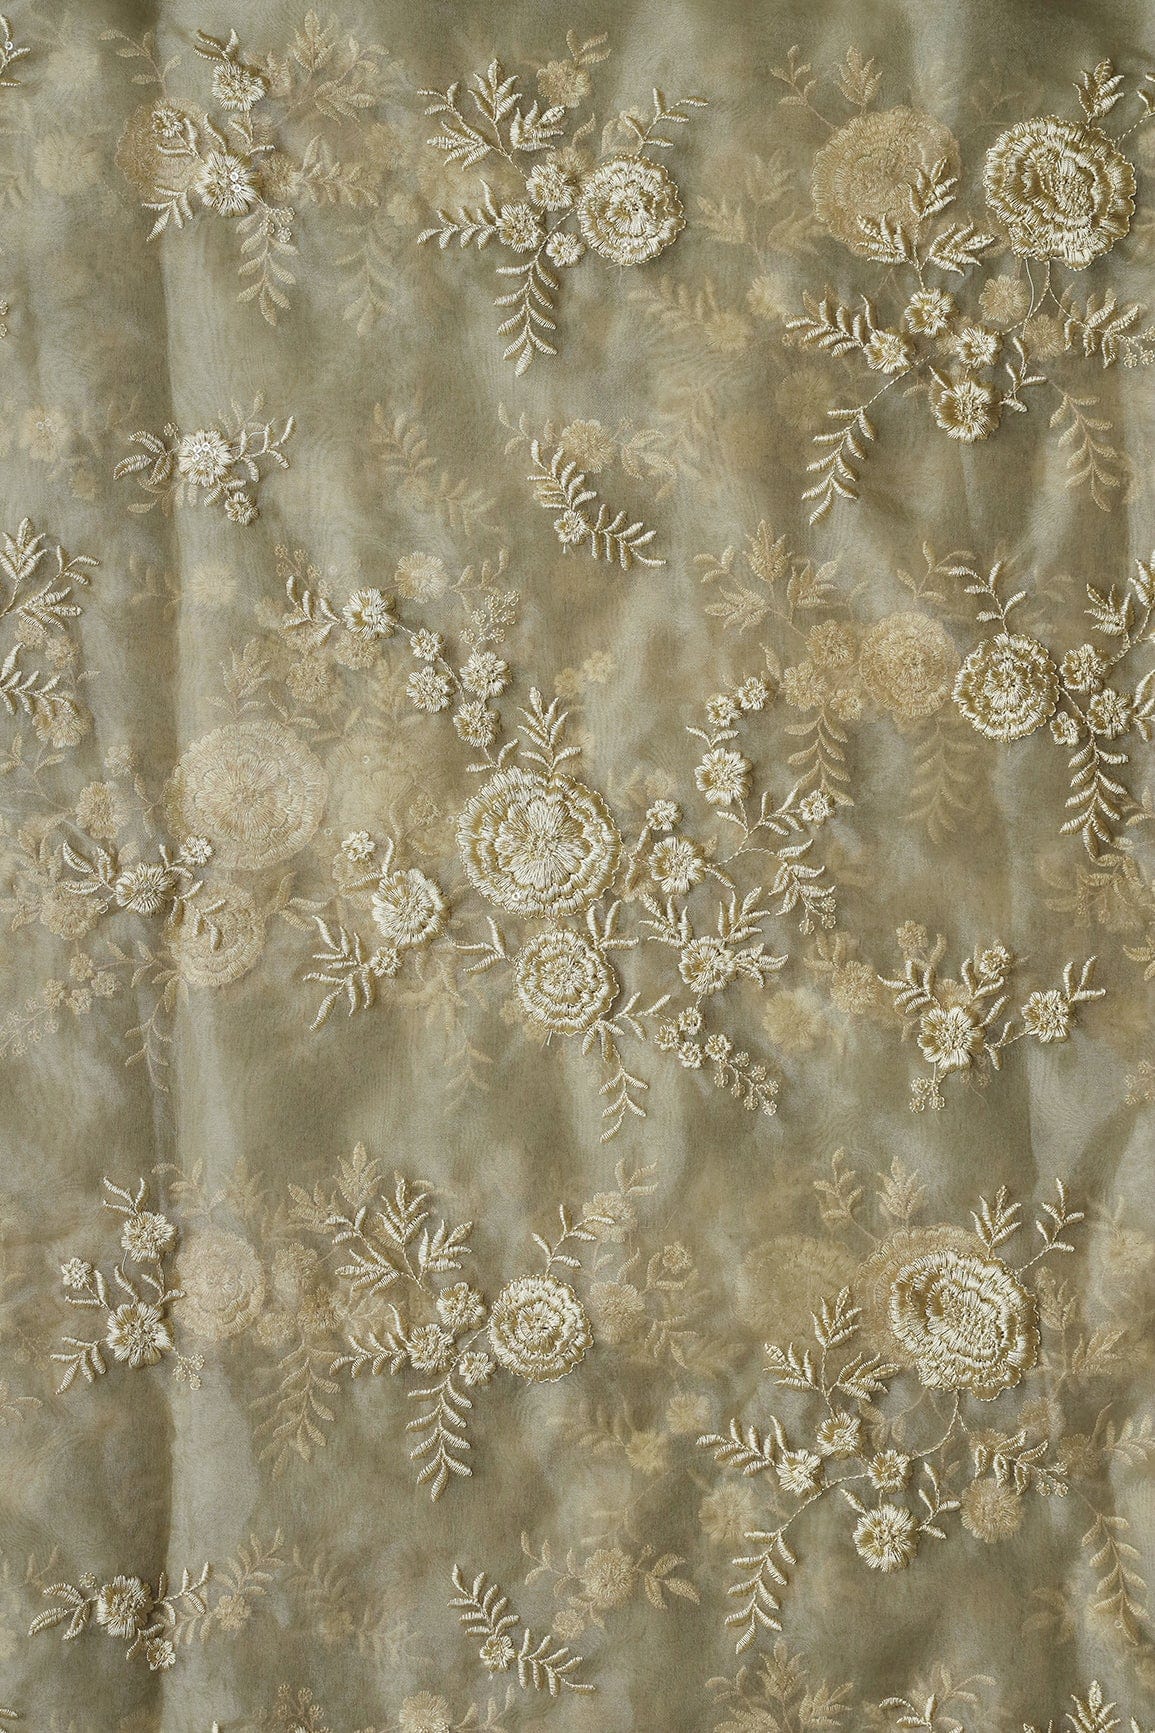 doeraa Embroidery Fabrics Beige Thread With Water Sequins Floral Embroidery Work On Beige Organza Fabric